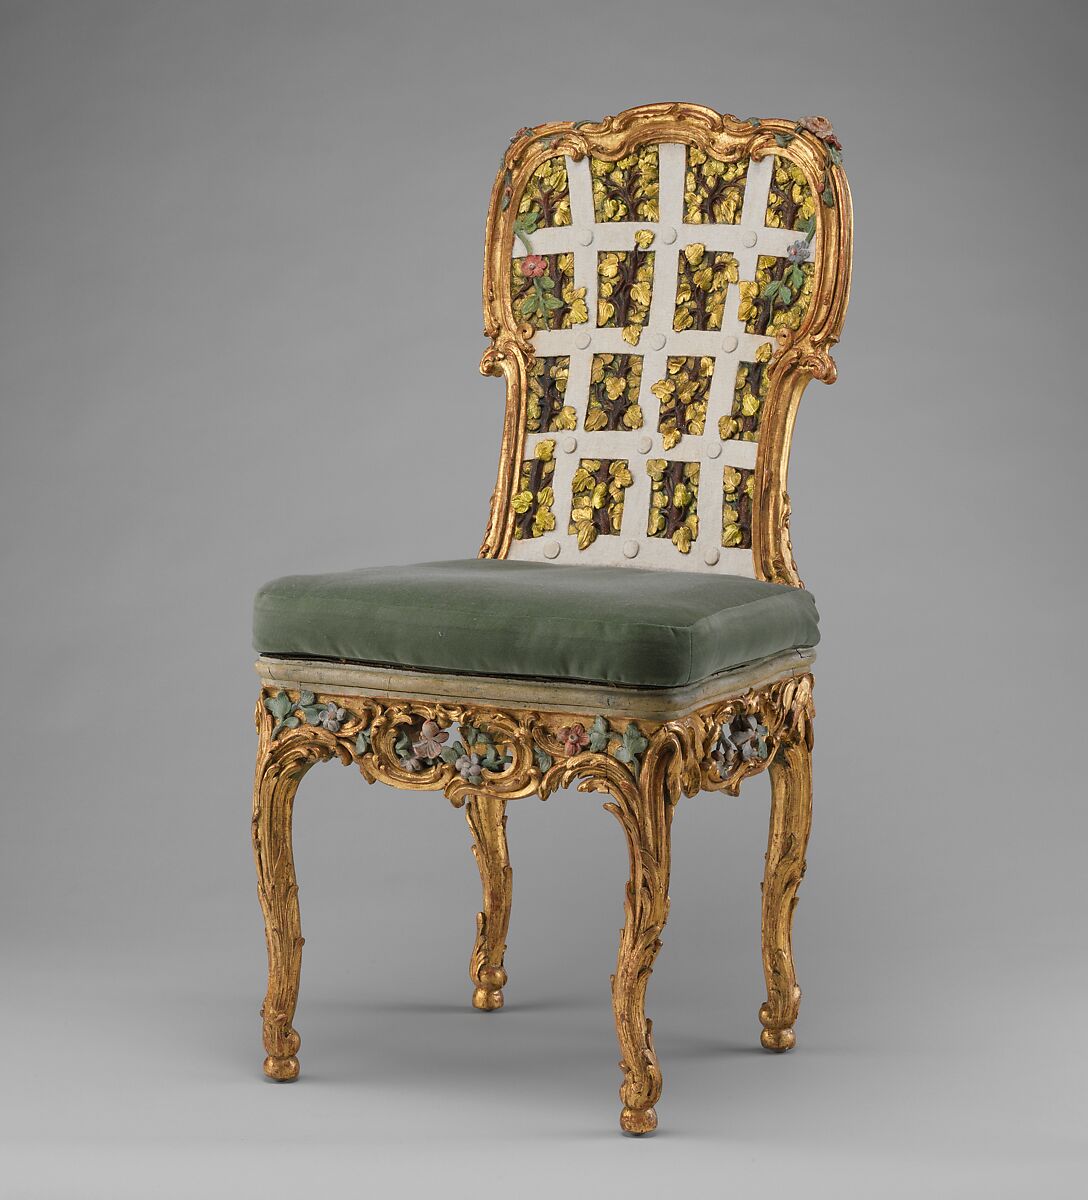 Side chair (one of four) (part of a set), Attributed to Johann Michael Bauer (German, Westheim 1710–1779 Bamberg), Carved, painted and gilded limewood; squab pillow in silk velvet (not original), German, Würzburg 